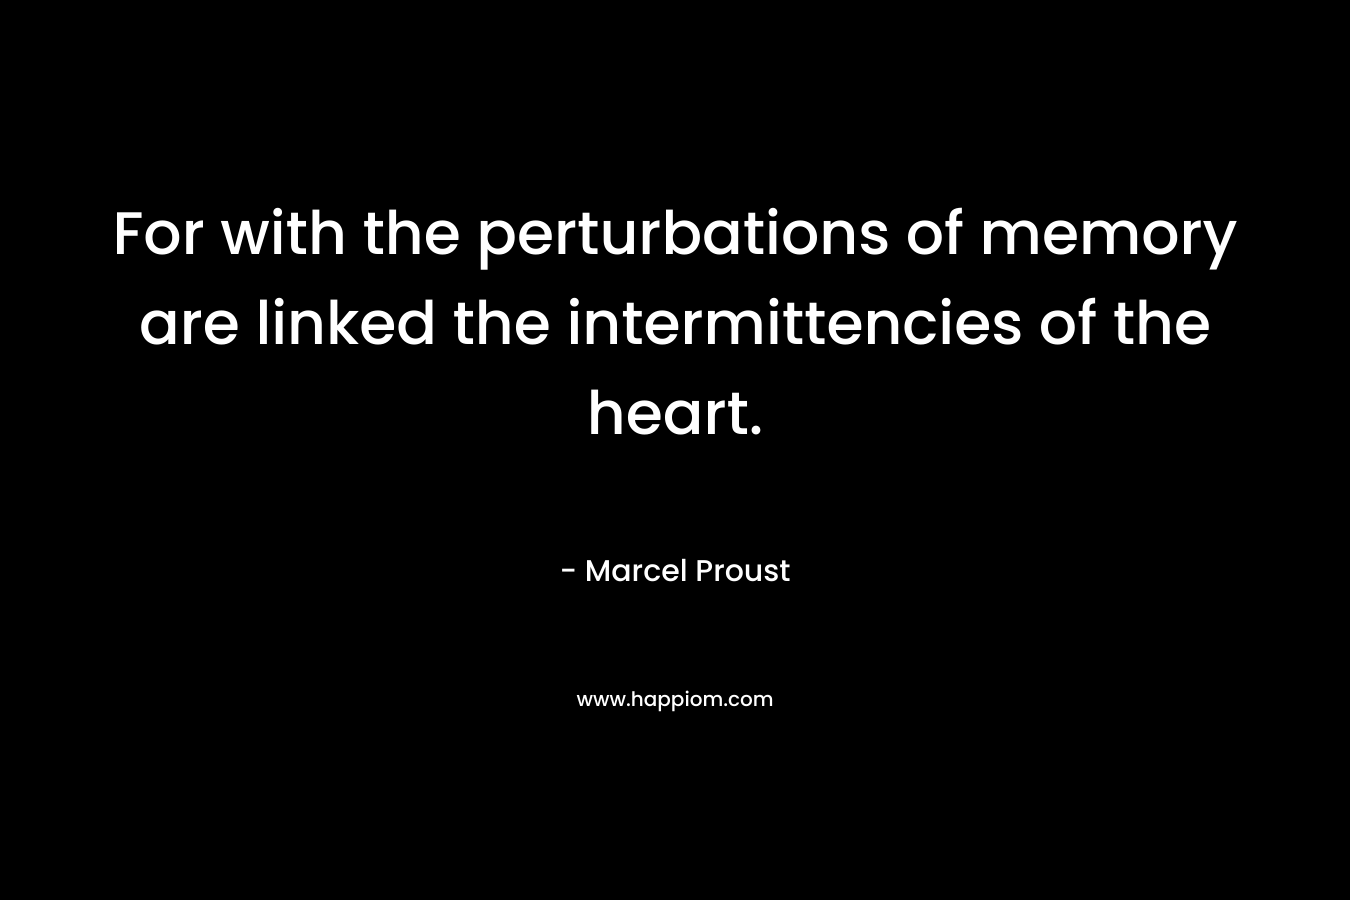 For with the perturbations of memory are linked the intermittencies of the heart.